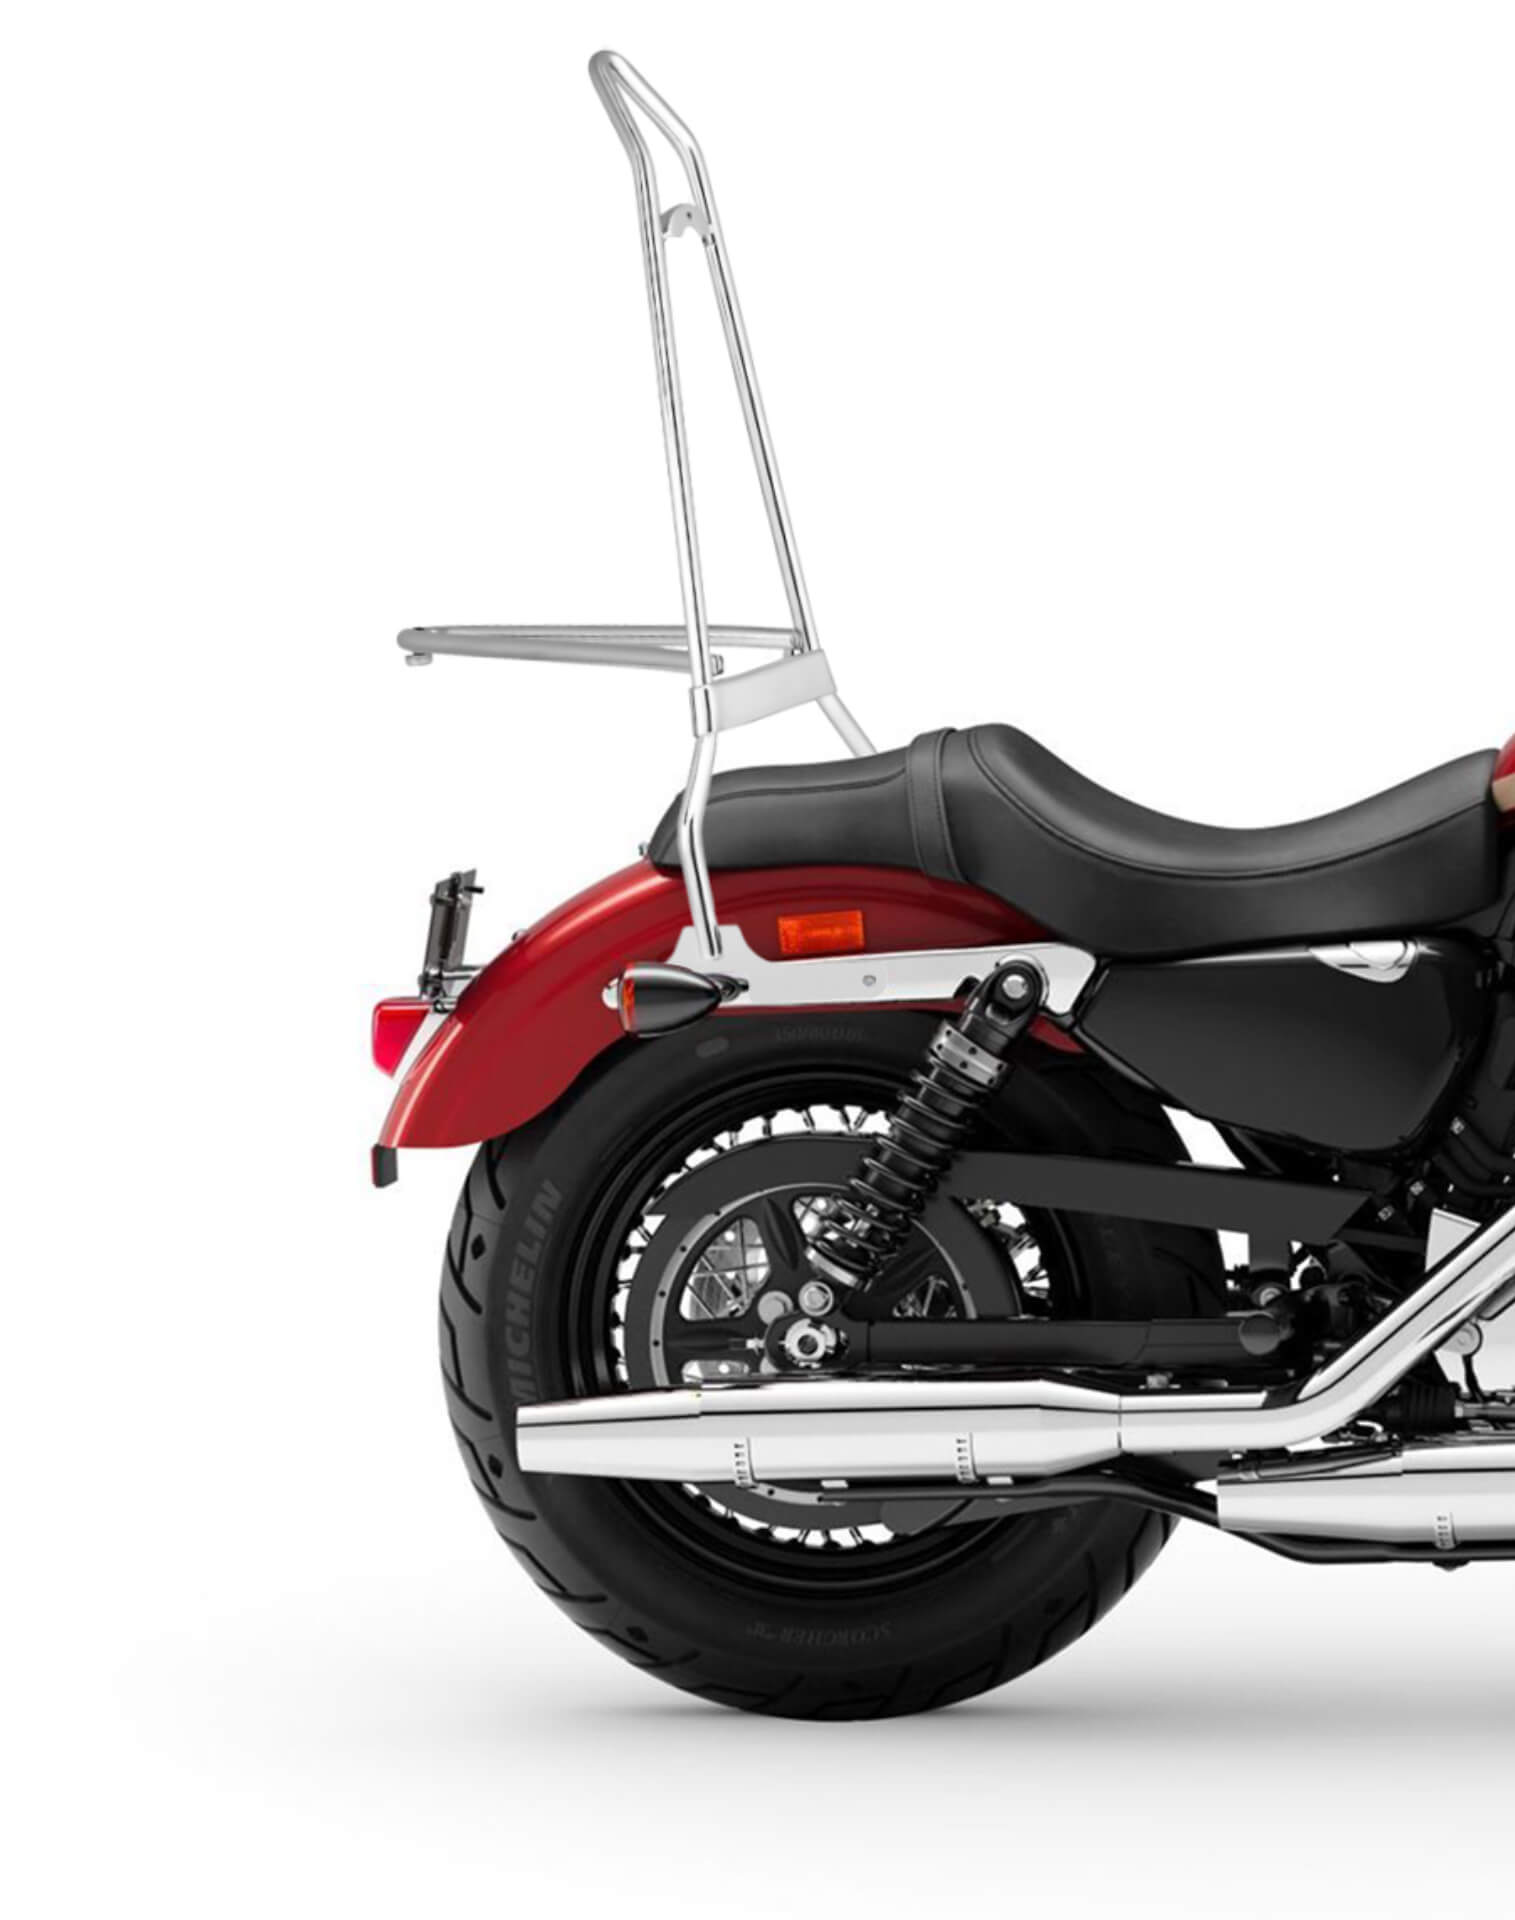 Iron Born Blade 25" Sissy Bar with Foldable Luggage Rack for Harley Sportster 1200 Custom XL1200C Chrome Close Up View